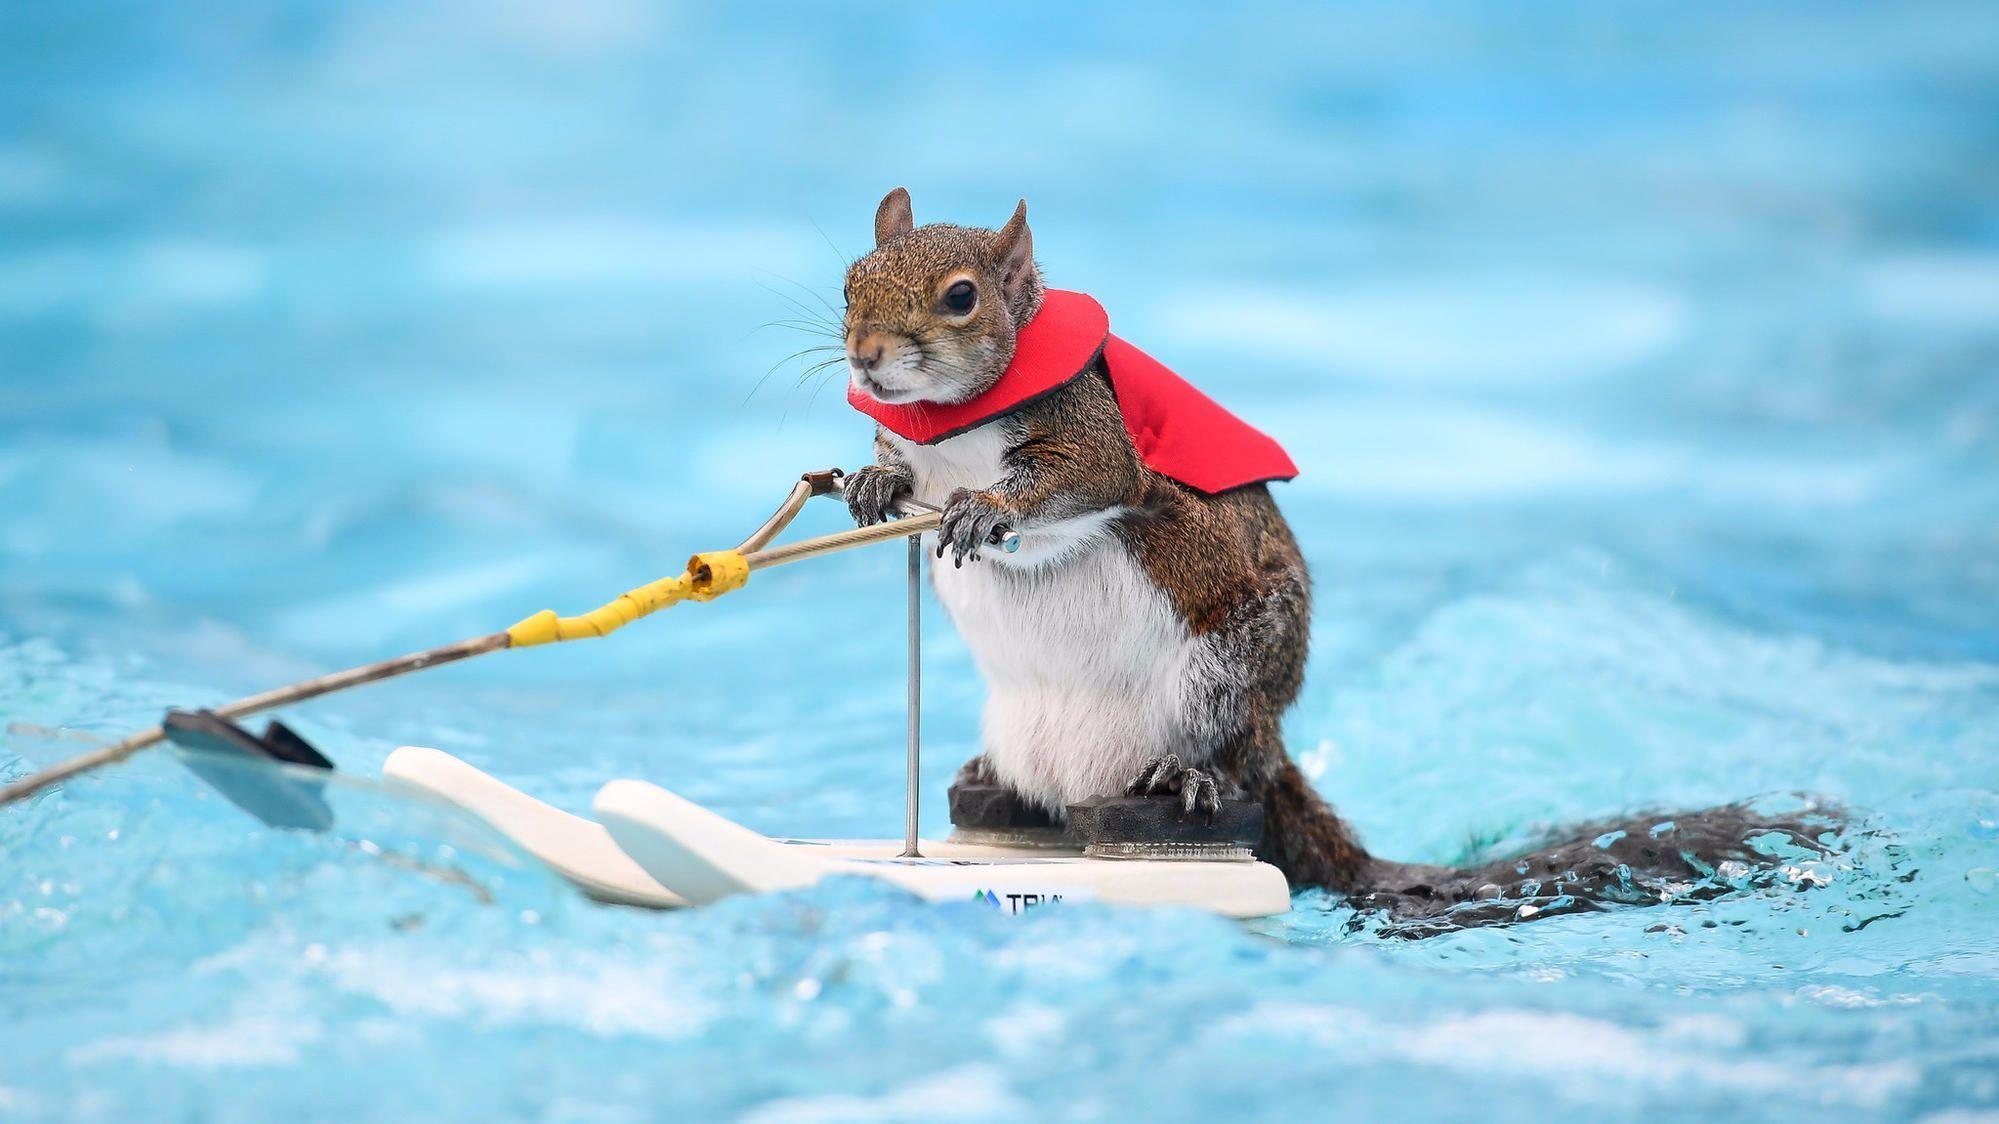 Twiggy the Waterskiing Squirrel will give her last performance at the Orlando Boat Show